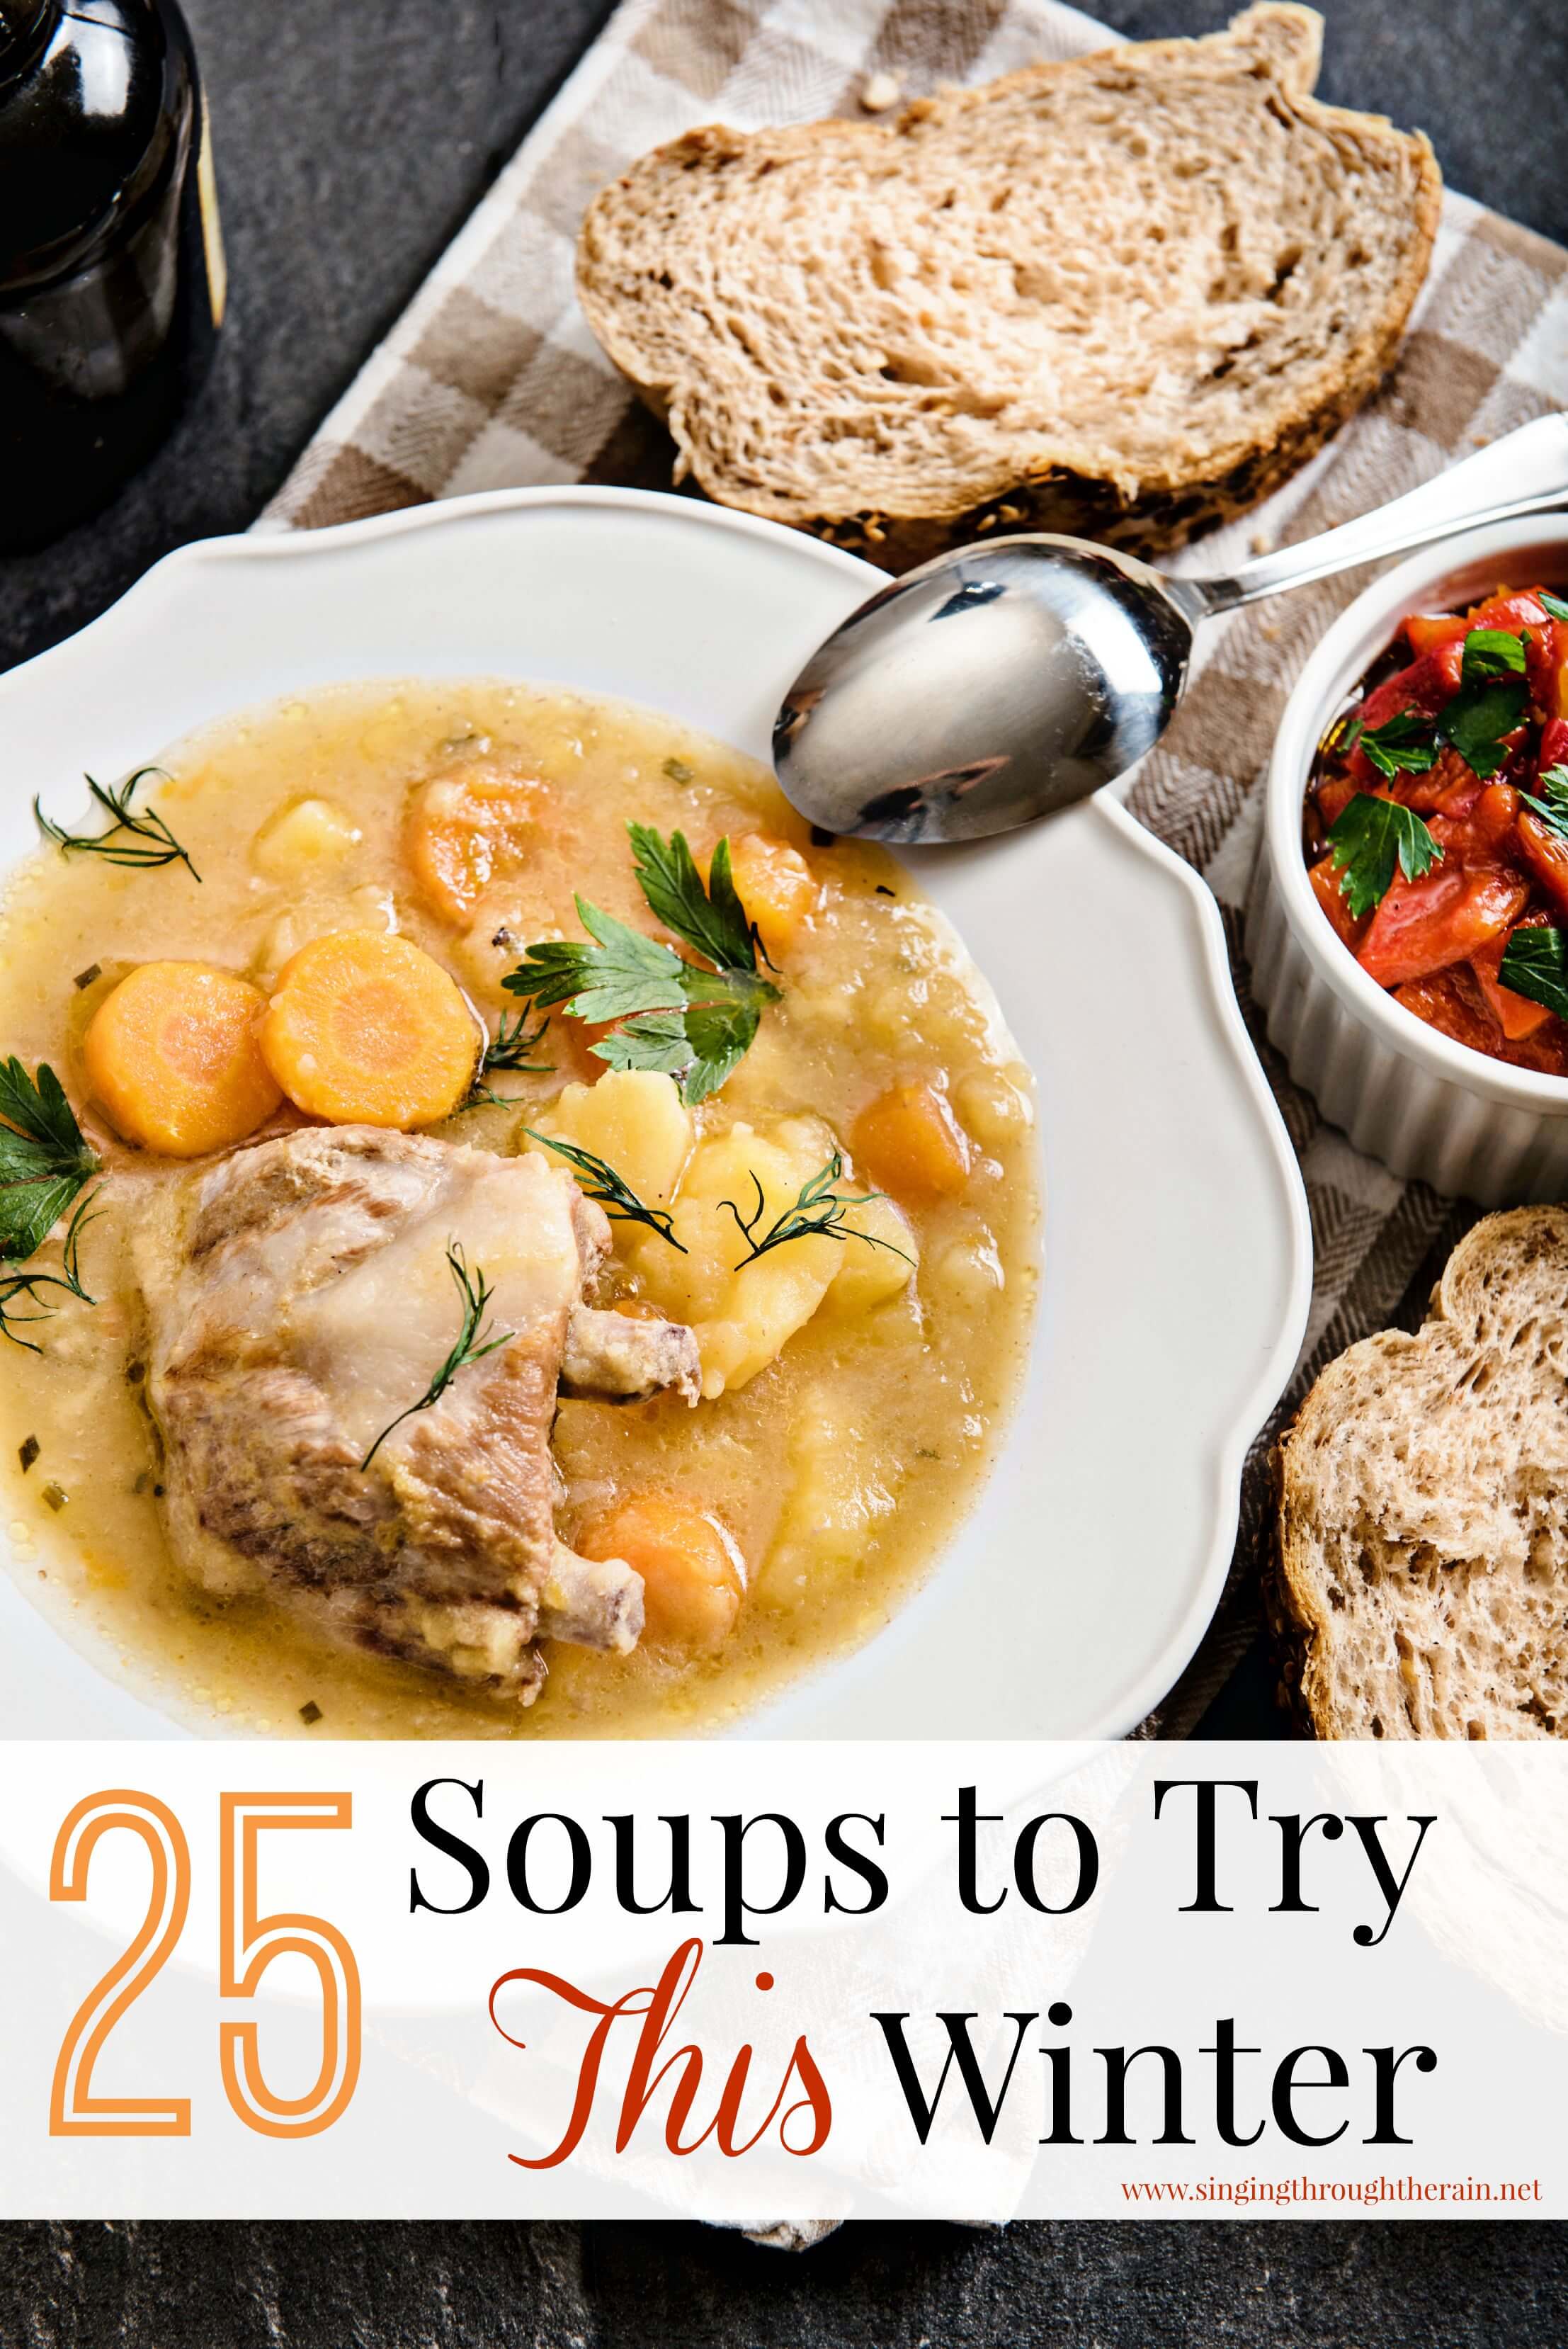 25 Soups to Try This Winter